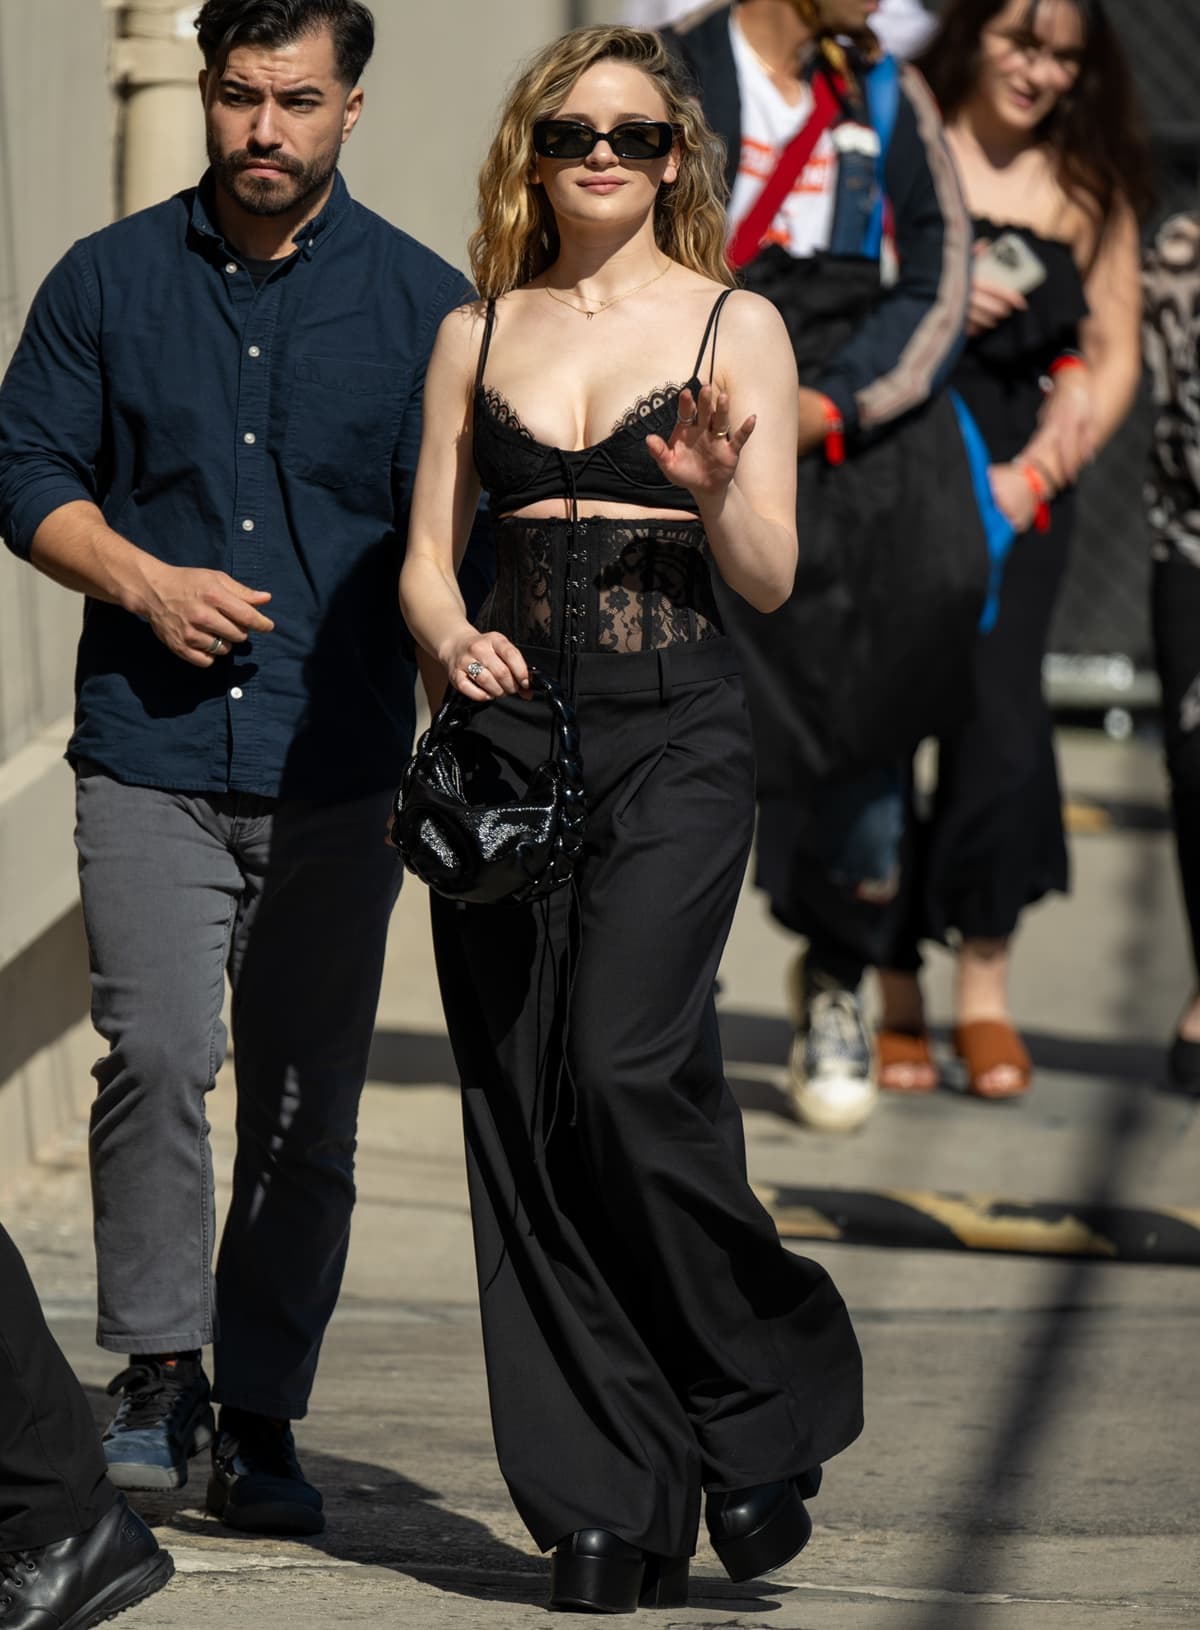 Arriving in style, Joey King turns heads at 'Jimmy Kimmel Live' wearing a bold Monse ensemble featuring a lace trim halter bralette and bustier pants, accessorized with Linda Farrow sunglasses, a Hereu bag, and striking Naked Wolfe platform boots